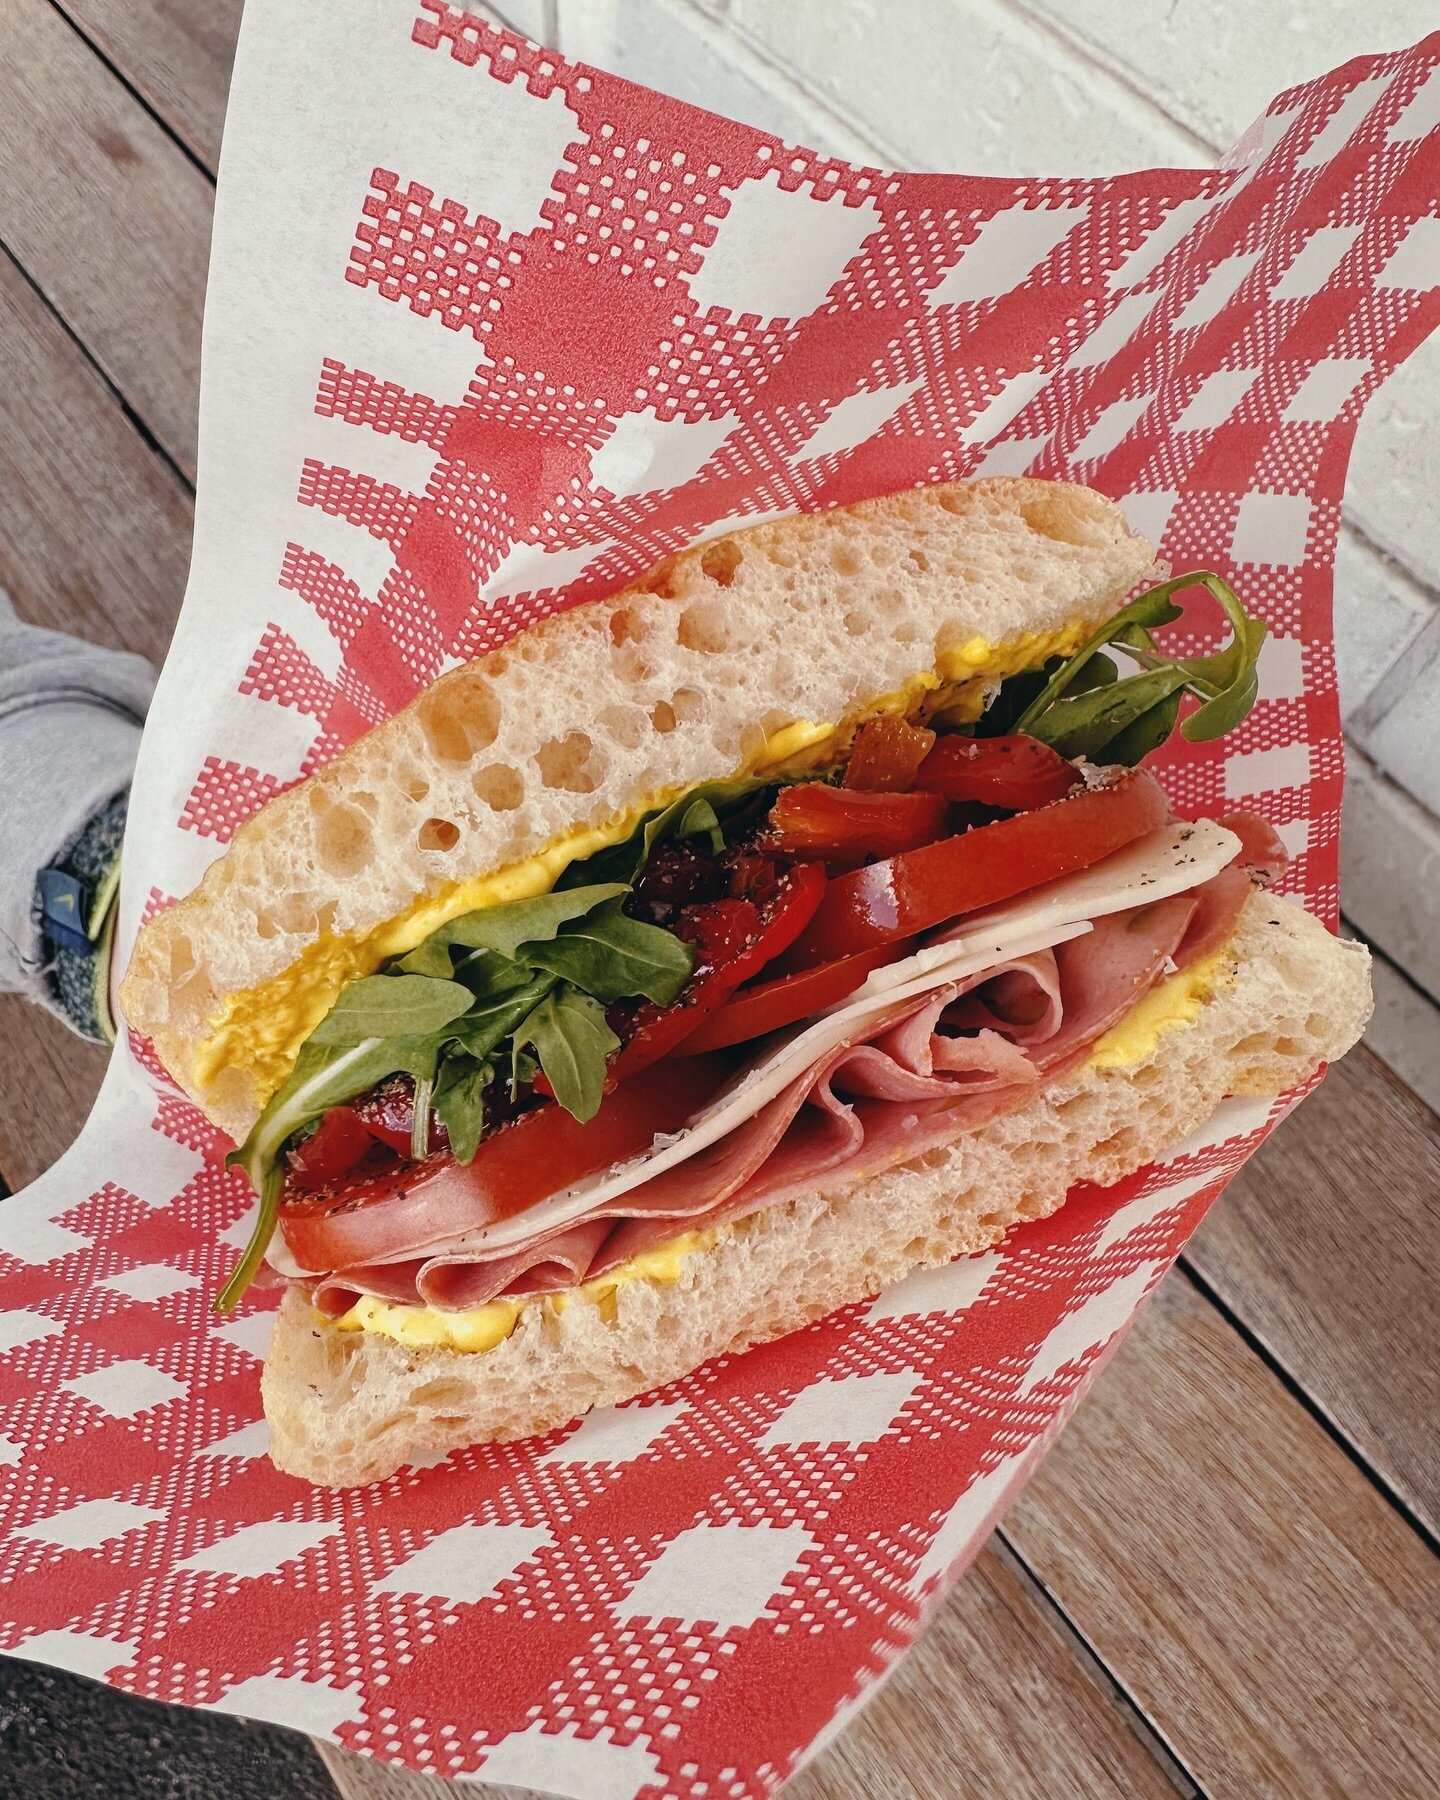 Our roll of the month for April is The Mortadella! @puopoloartisansalumi chilli mortadella, provolone, @albrownsgeneralstore habanero mustard mayo, marinated peppers, tomato and rocket in a @lamadrebakery focaccia. Yum! Everyday until sold out!